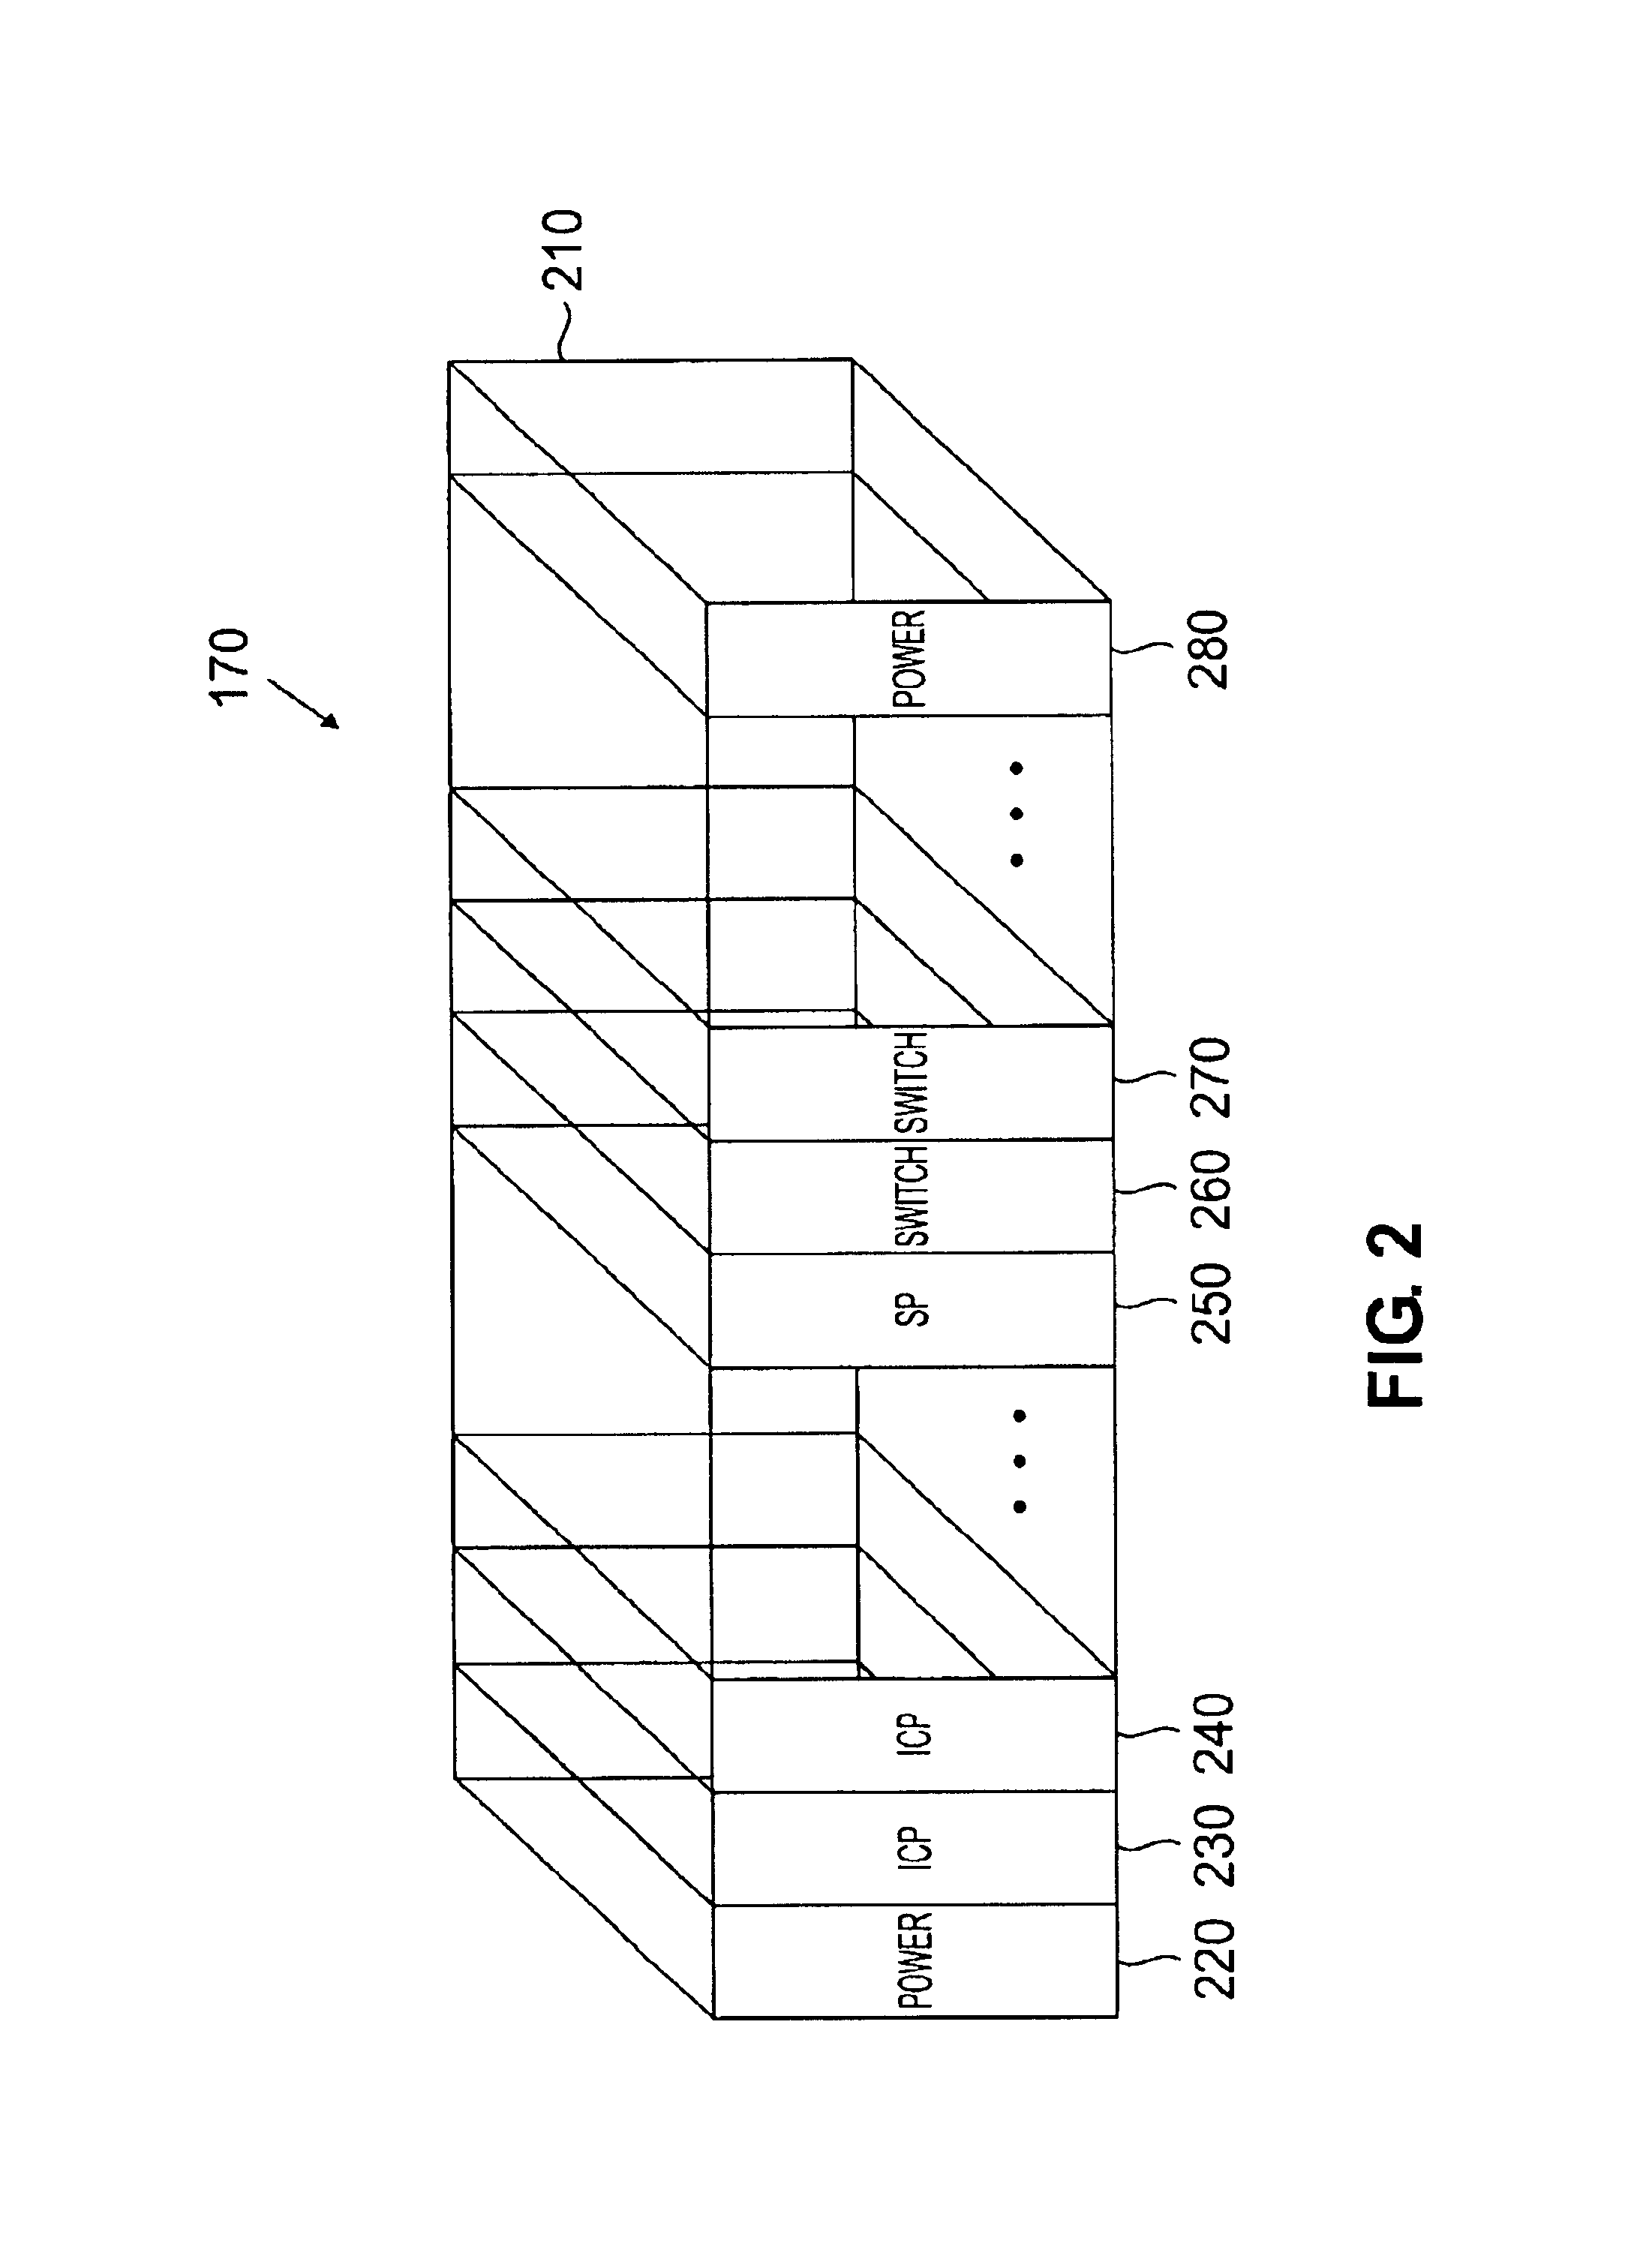 System and method for providing an improved common control bus for use in on-line insertion of line replaceable units in wireless and wireline access systems